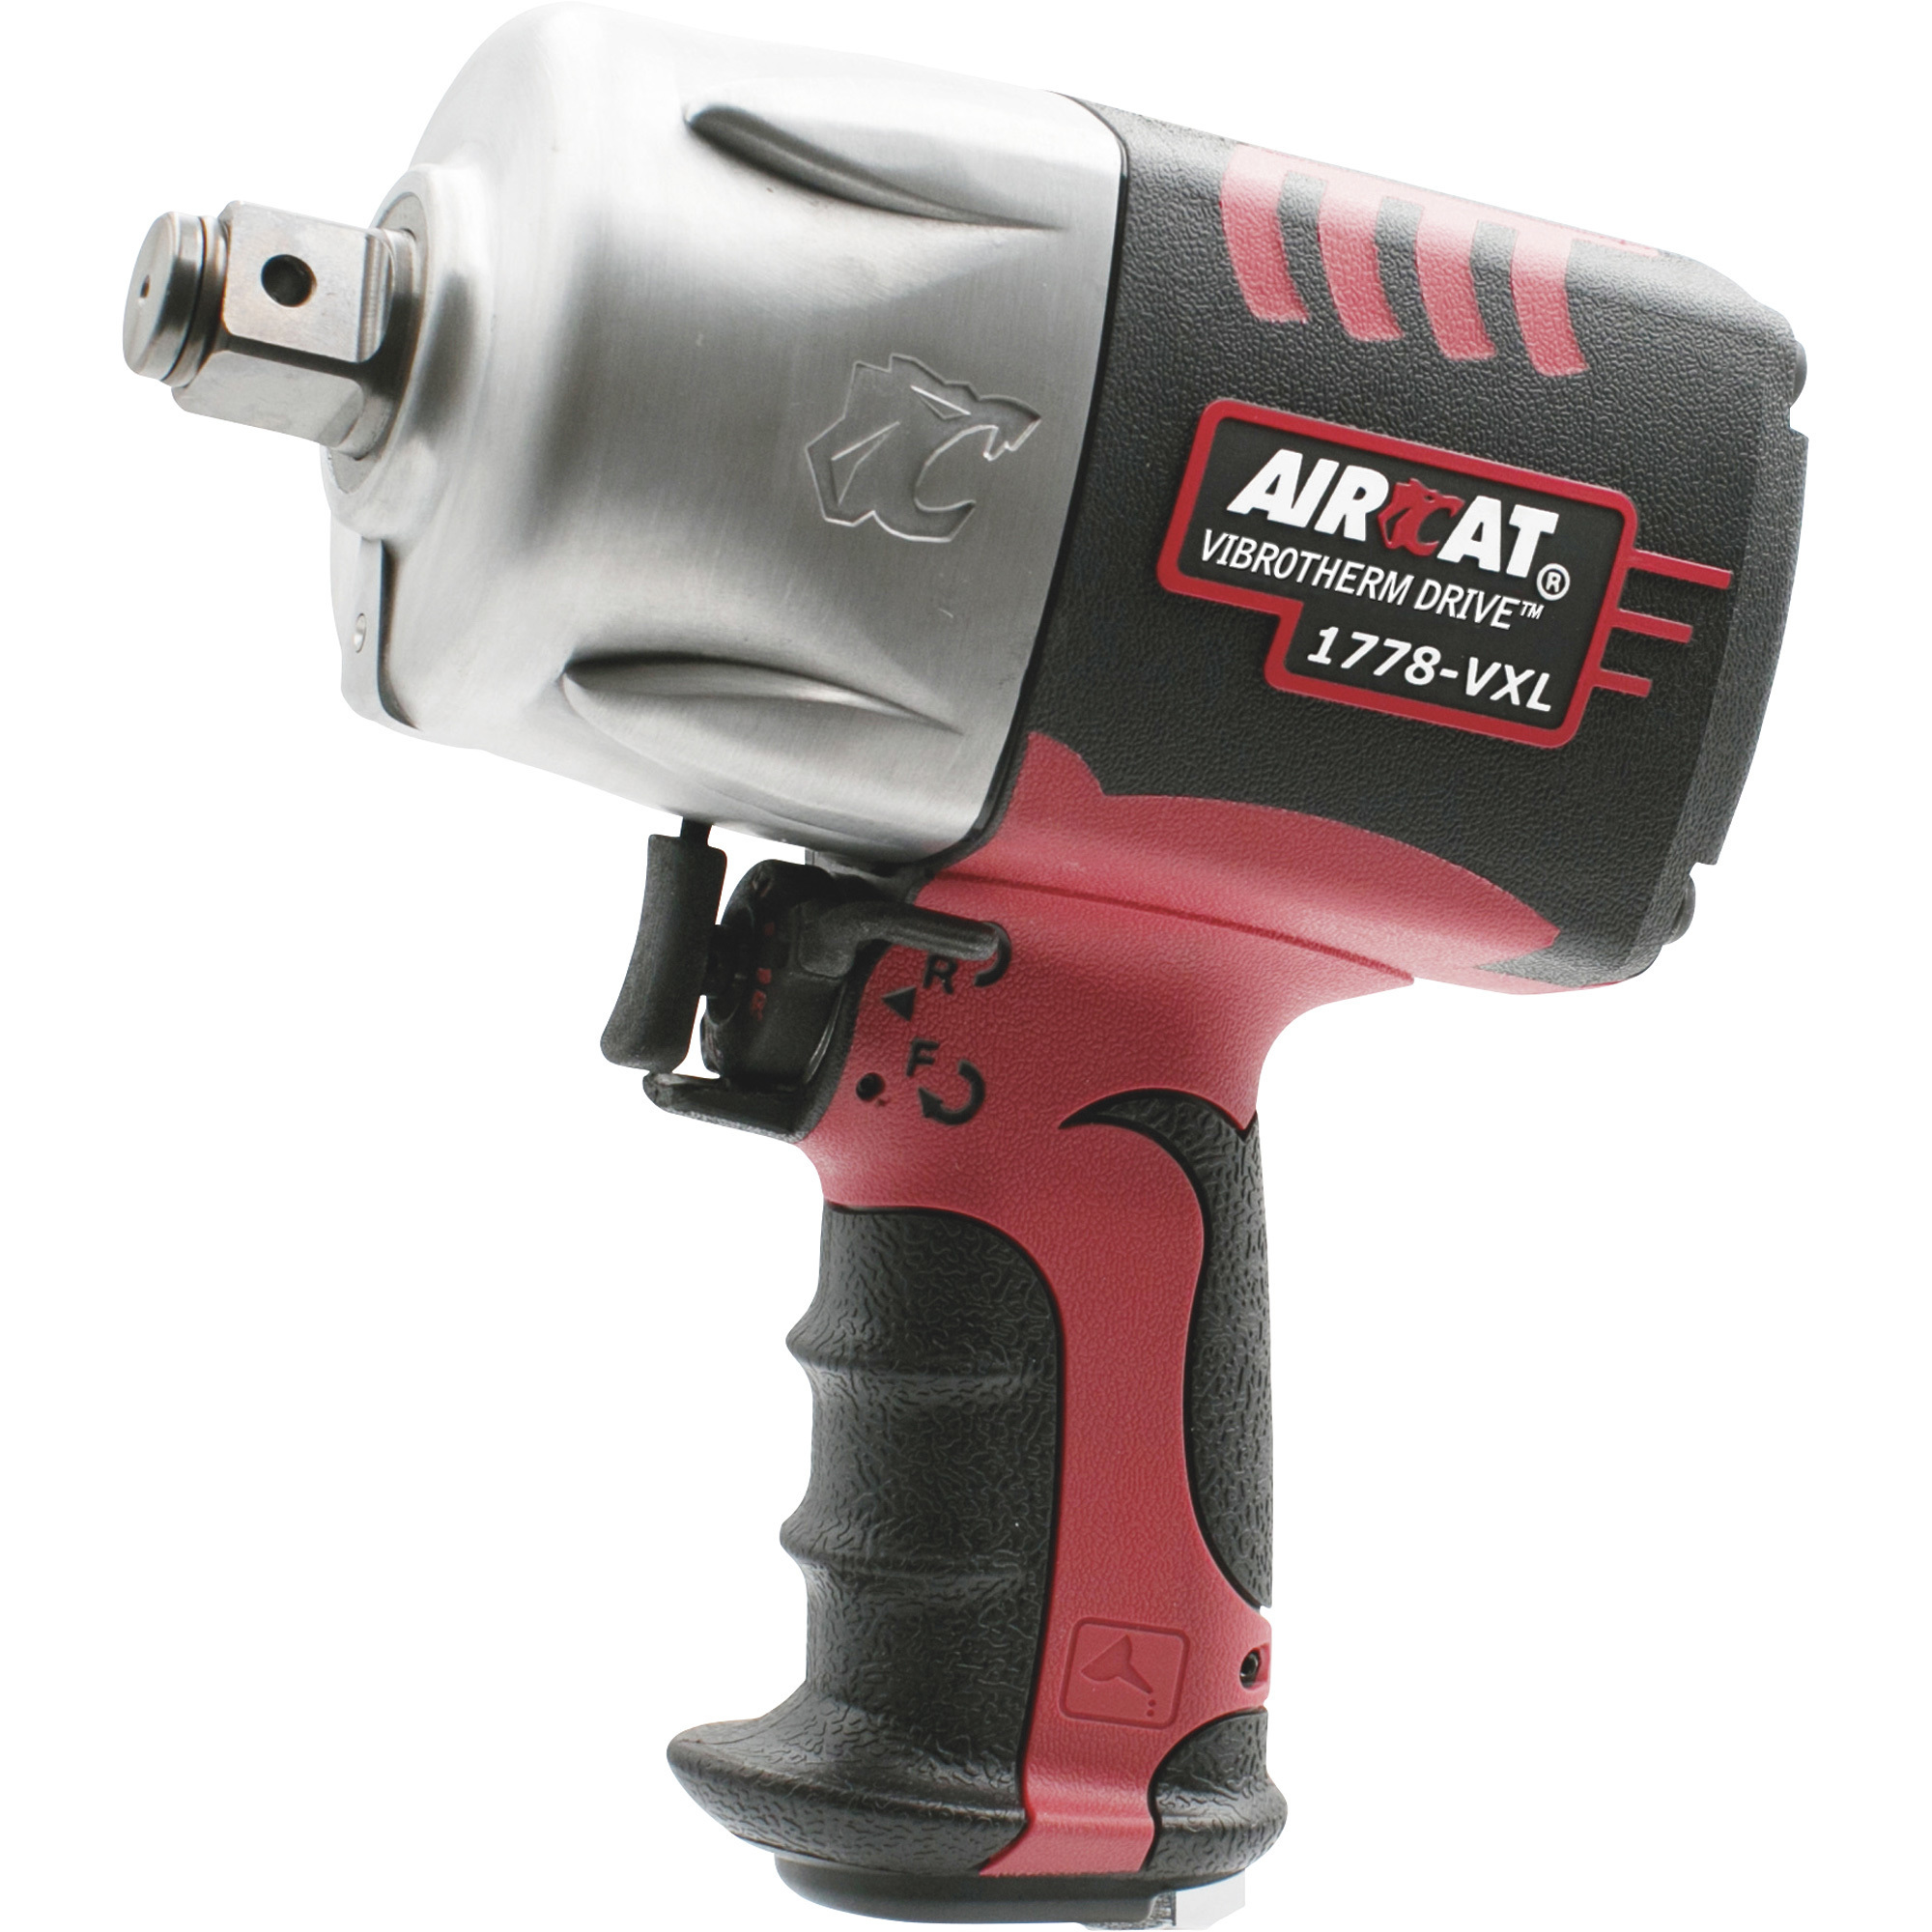 AIRCAT Vibrotherm Drive Composite Air Impact Wrench, 3/4Inch Drive, 8 CFM, 1700ft./lbs. Torque, Model 1778-VXL